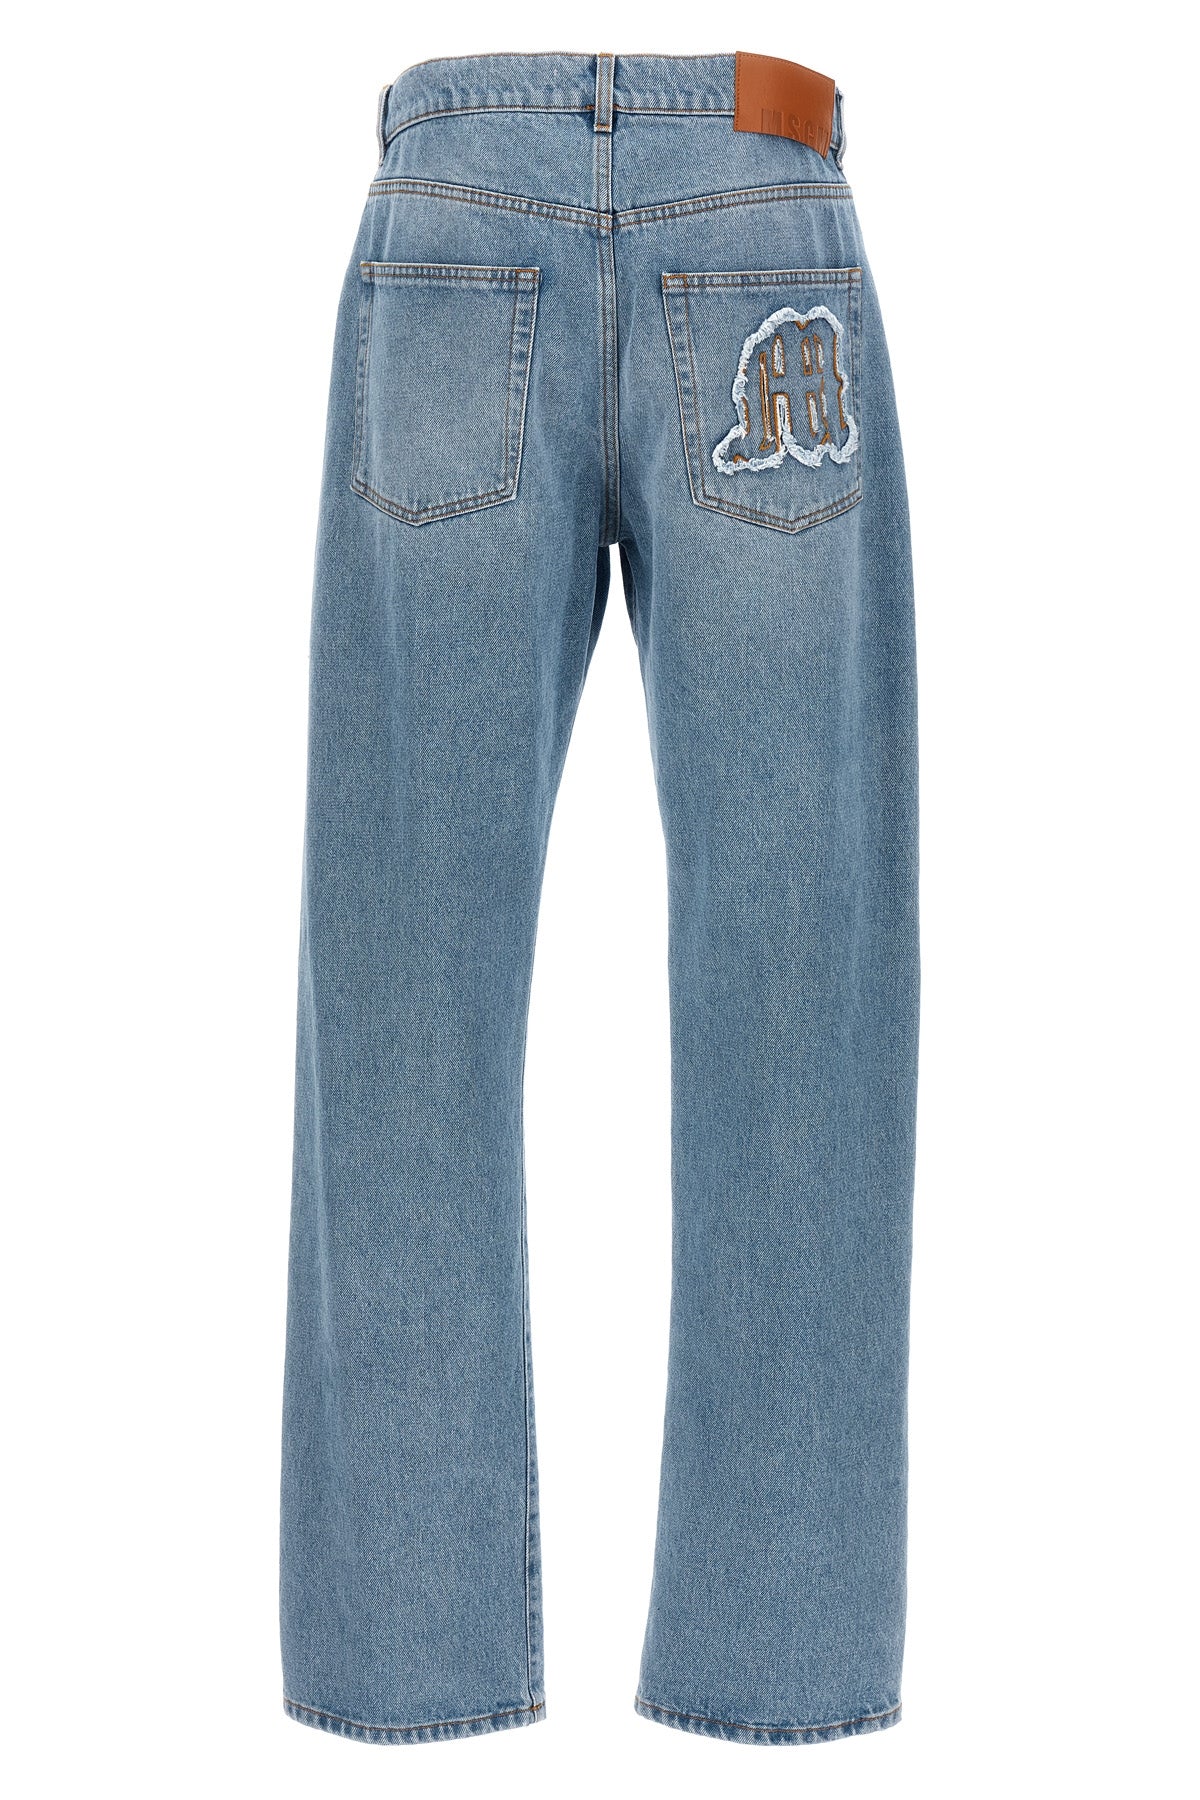 MSGM LOGO EMBROIDERY JEANS